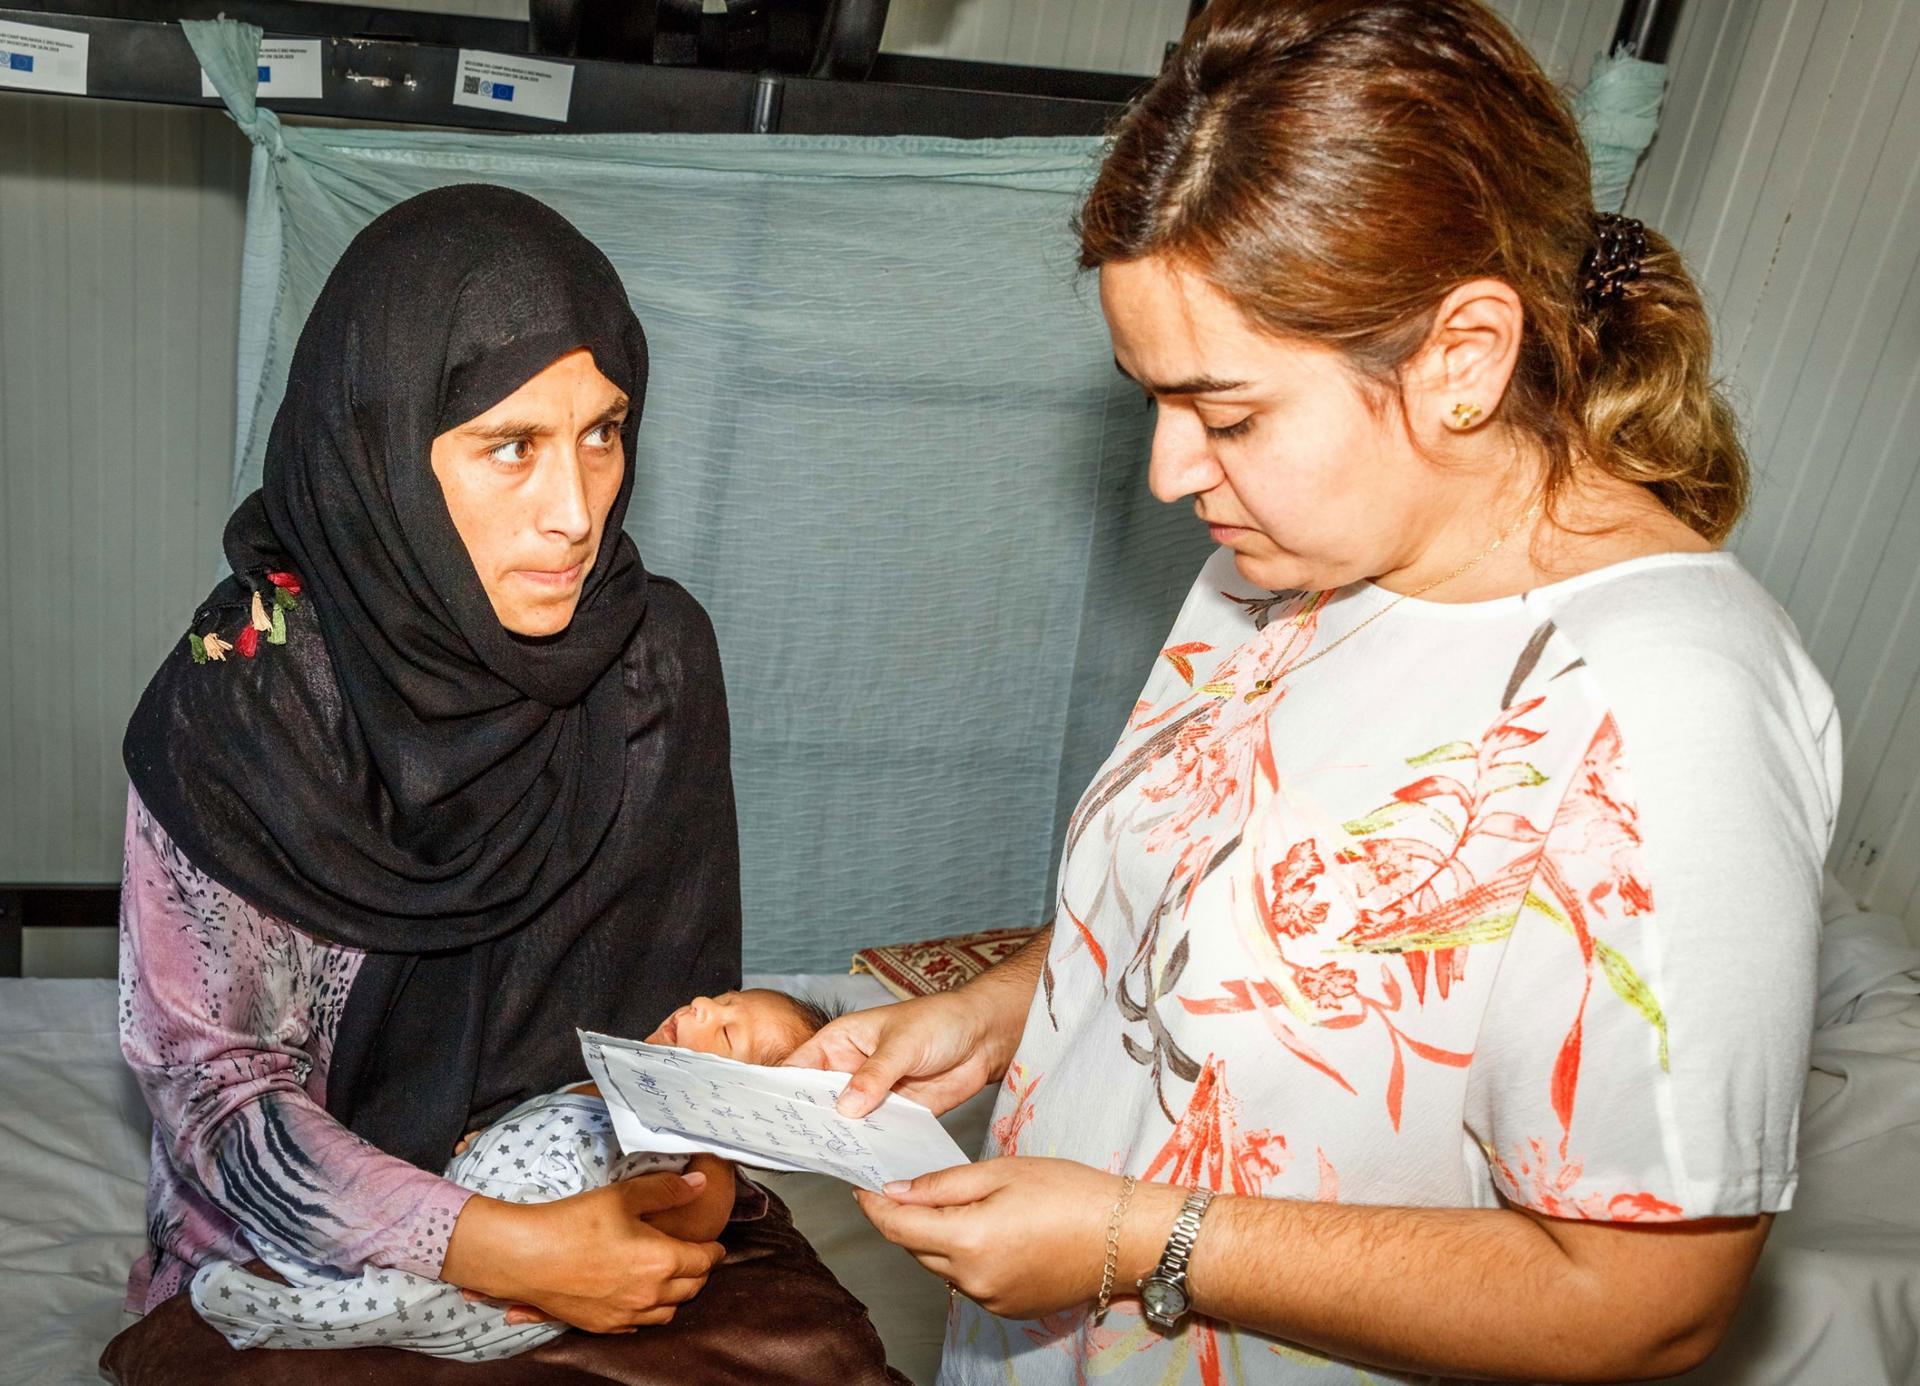 A woman is shown wearing a dark head scarf while holding an infant and looking at another woman holding papers.